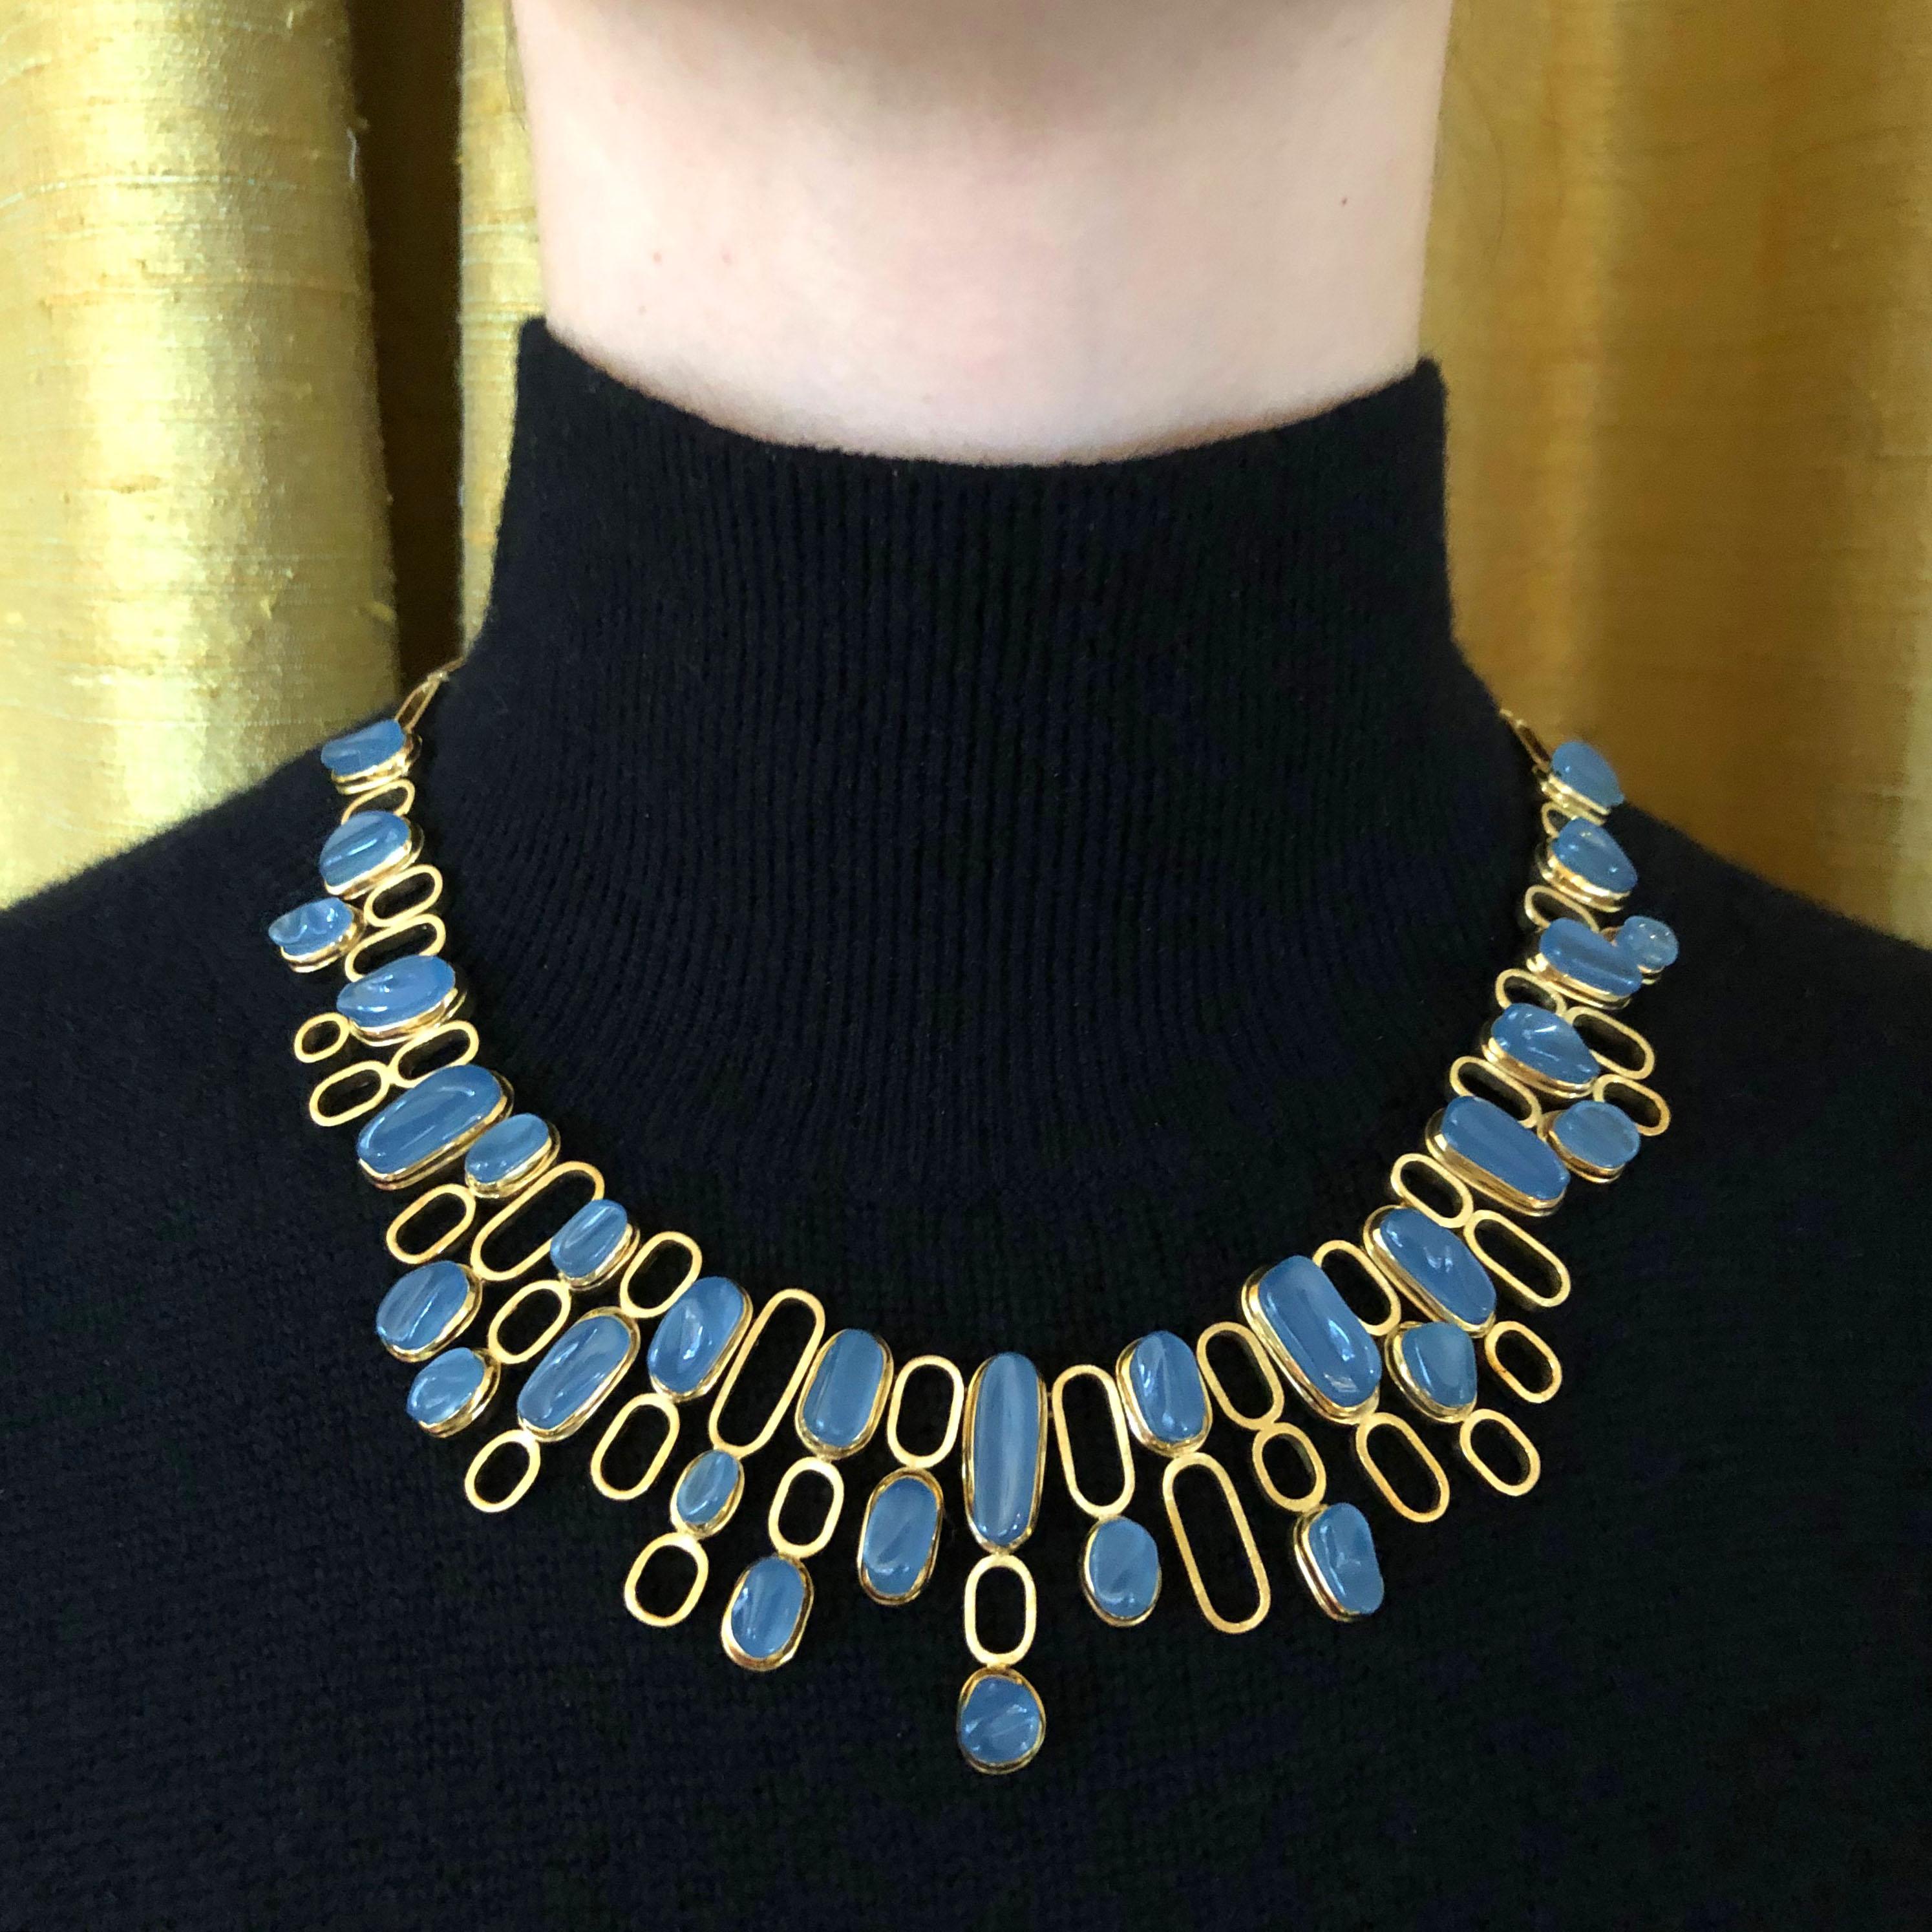 A rare forma livre carved aquamarine and 18 karat gold necklace and long earrings set, by Roberto & Haroldo Burle Marx, 1960s.

This necklace measures approximately 18